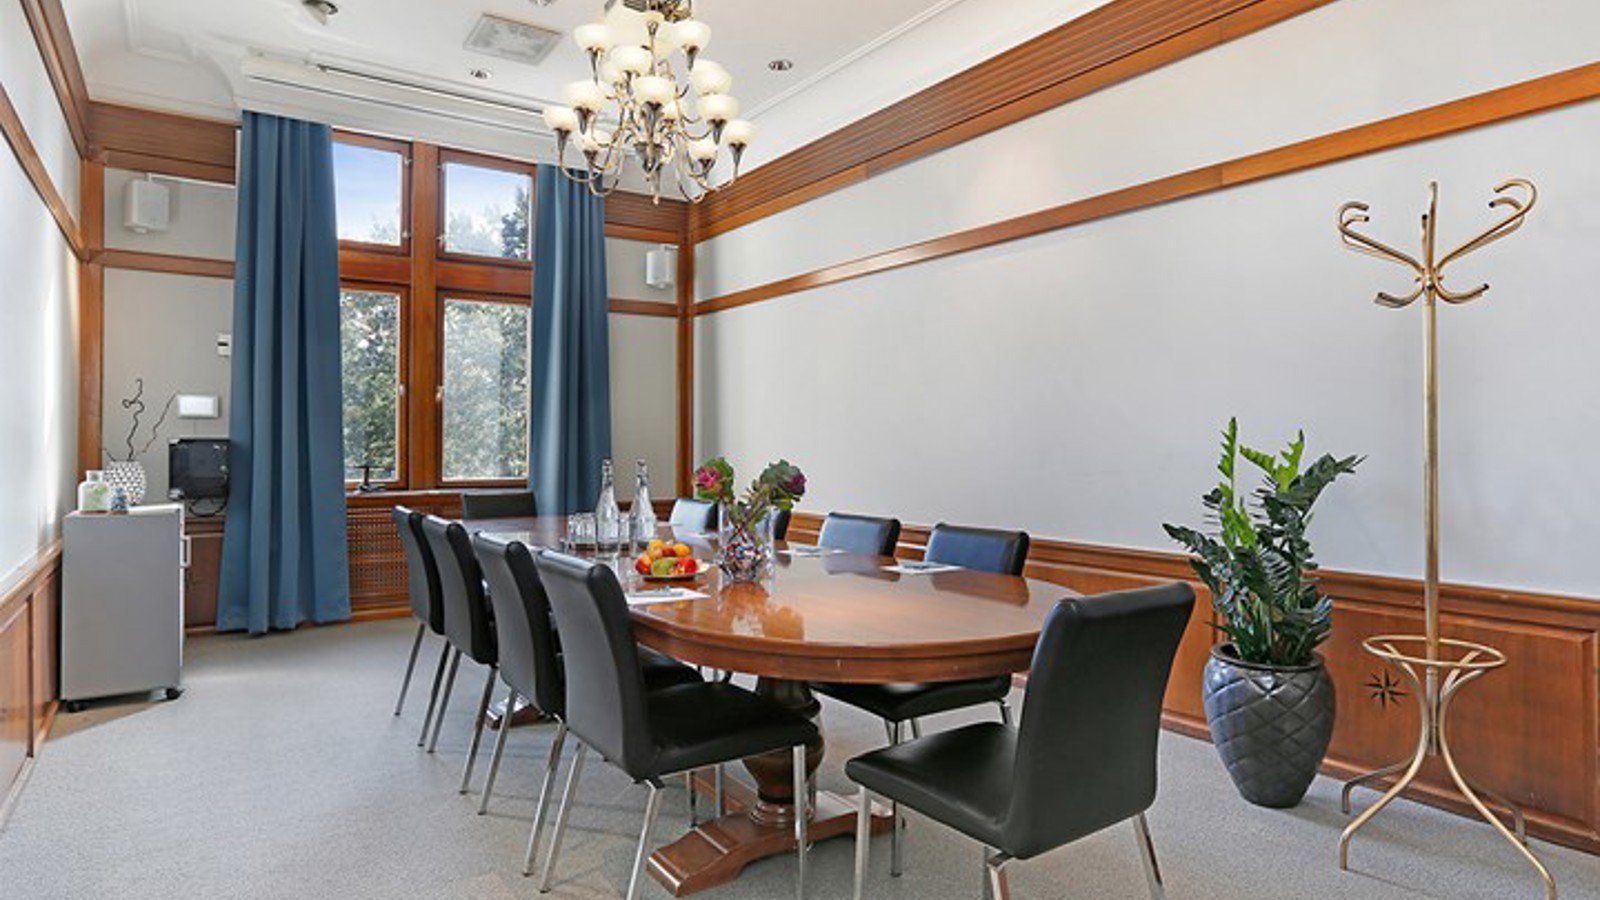 Boardroom with gray walls, blue curtains and wooden details